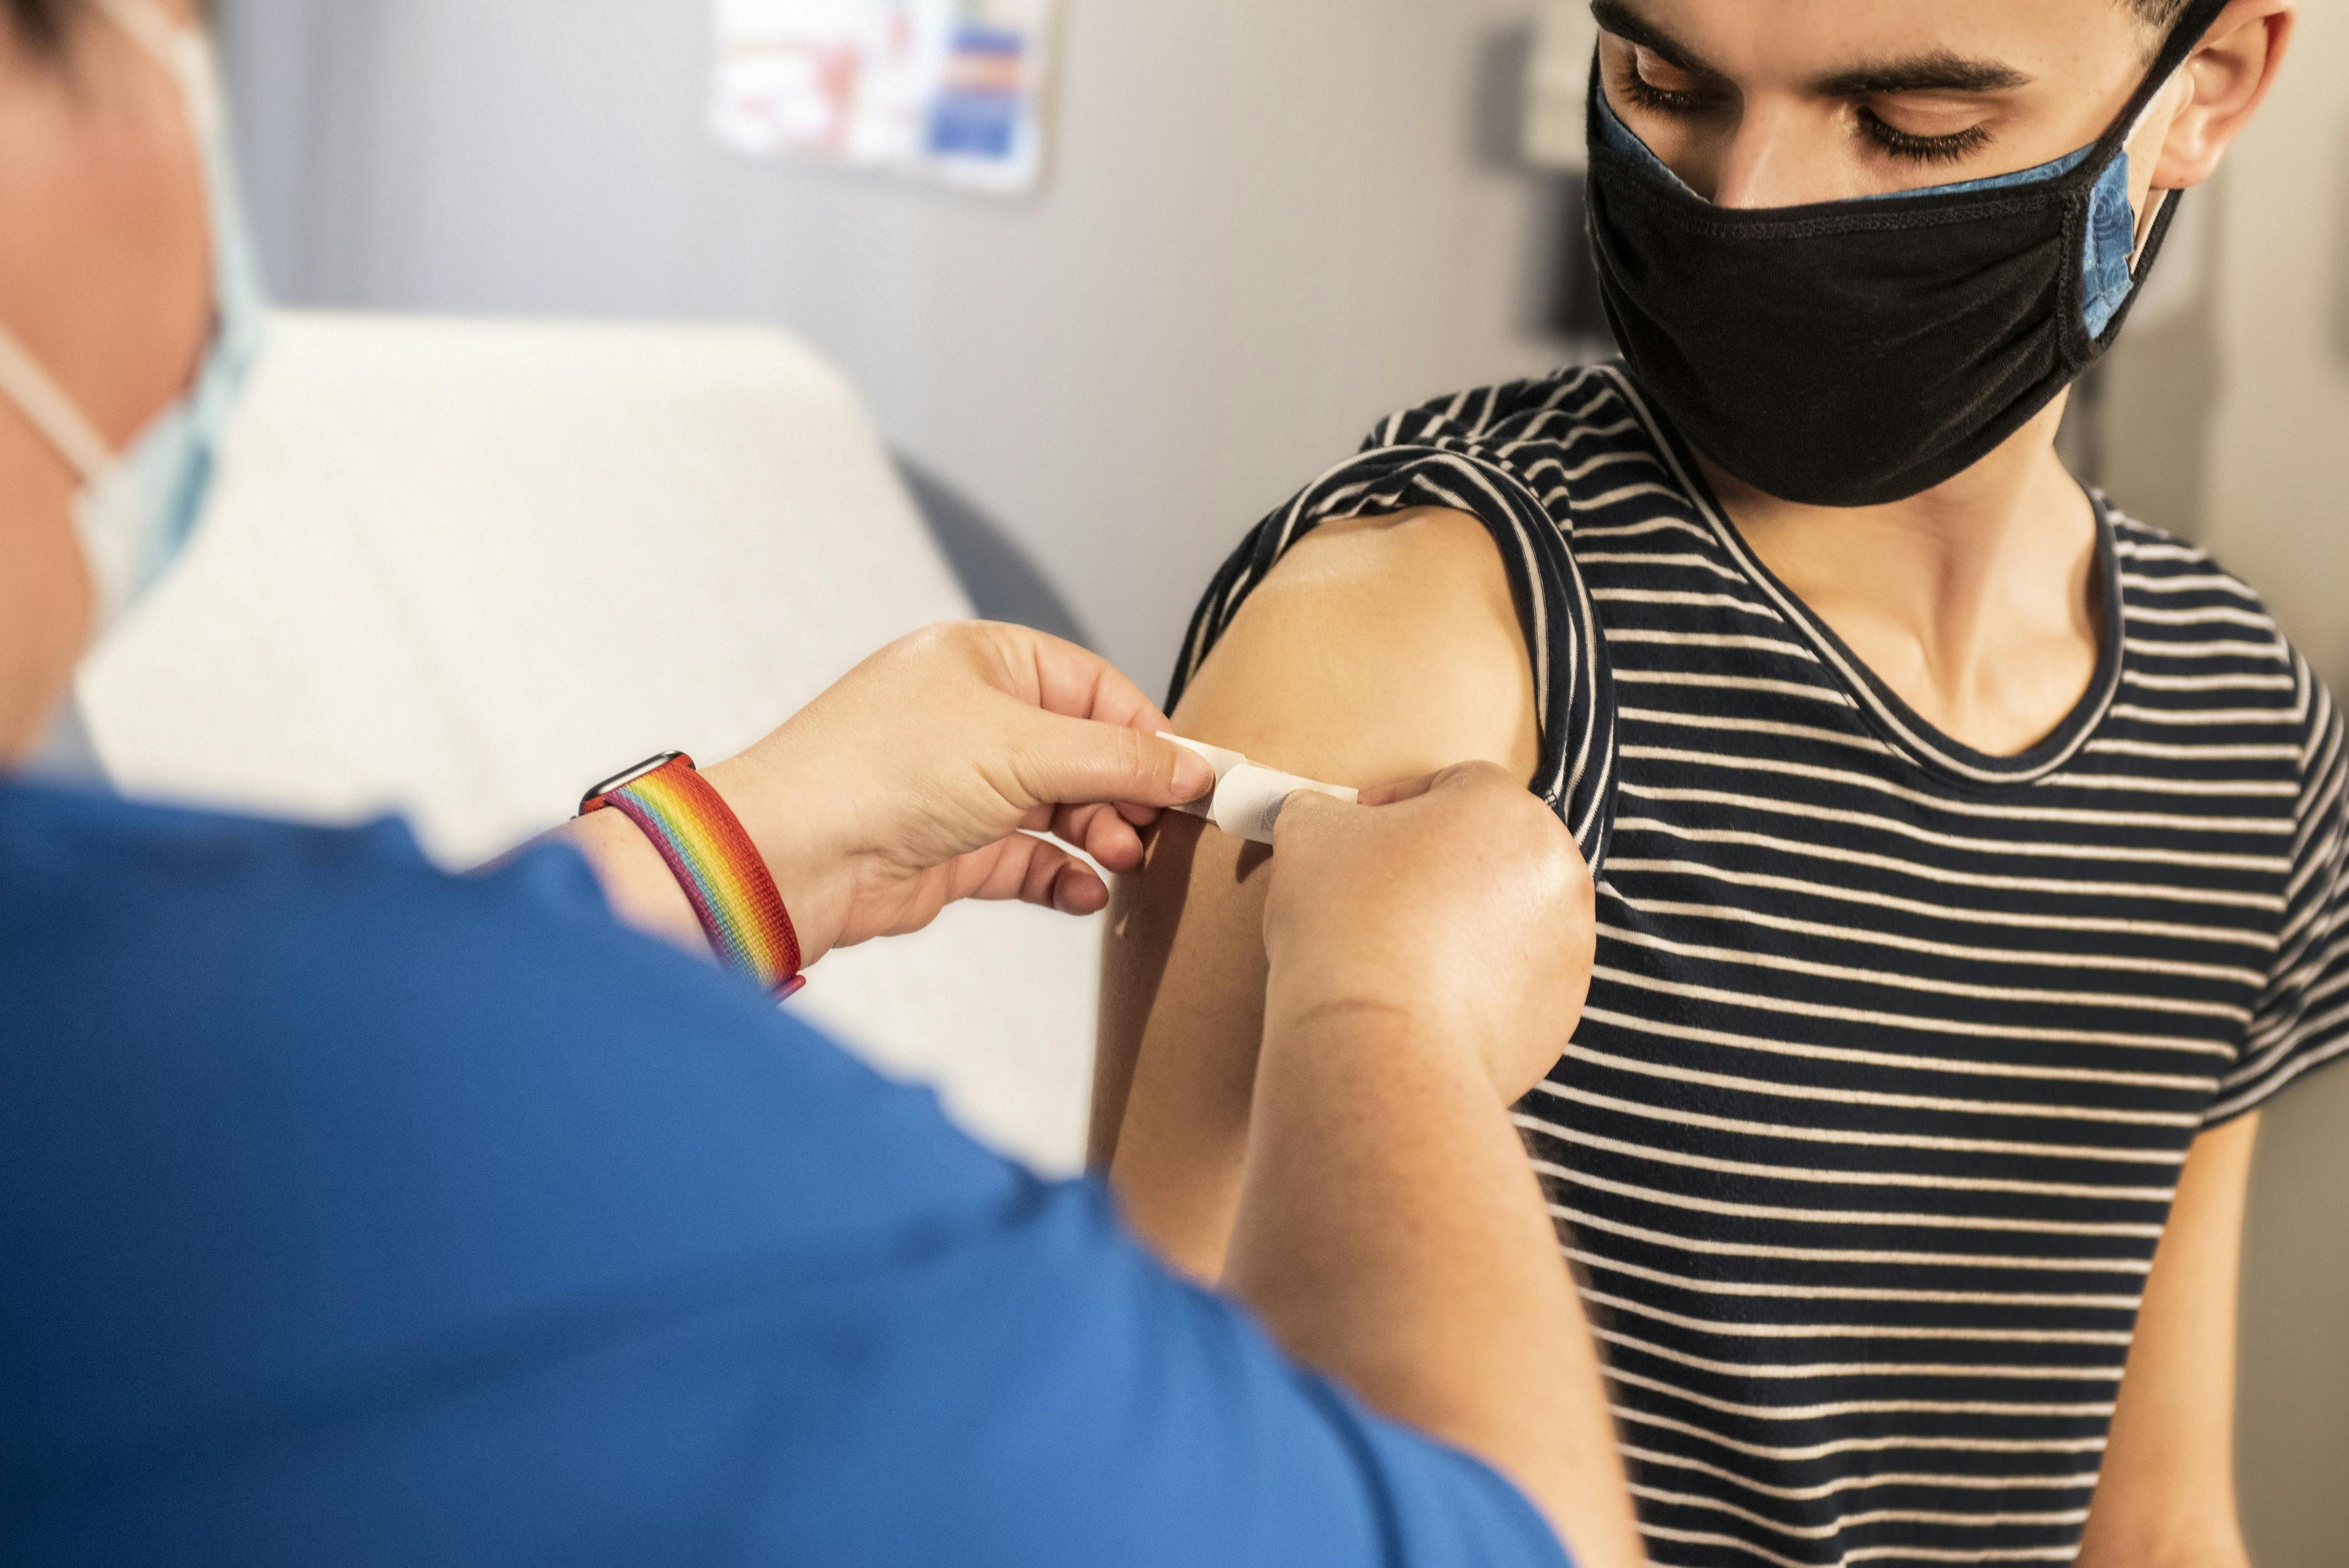 HPV Immunizations Higher in States Where Adolescents Can Consent to Vaccination